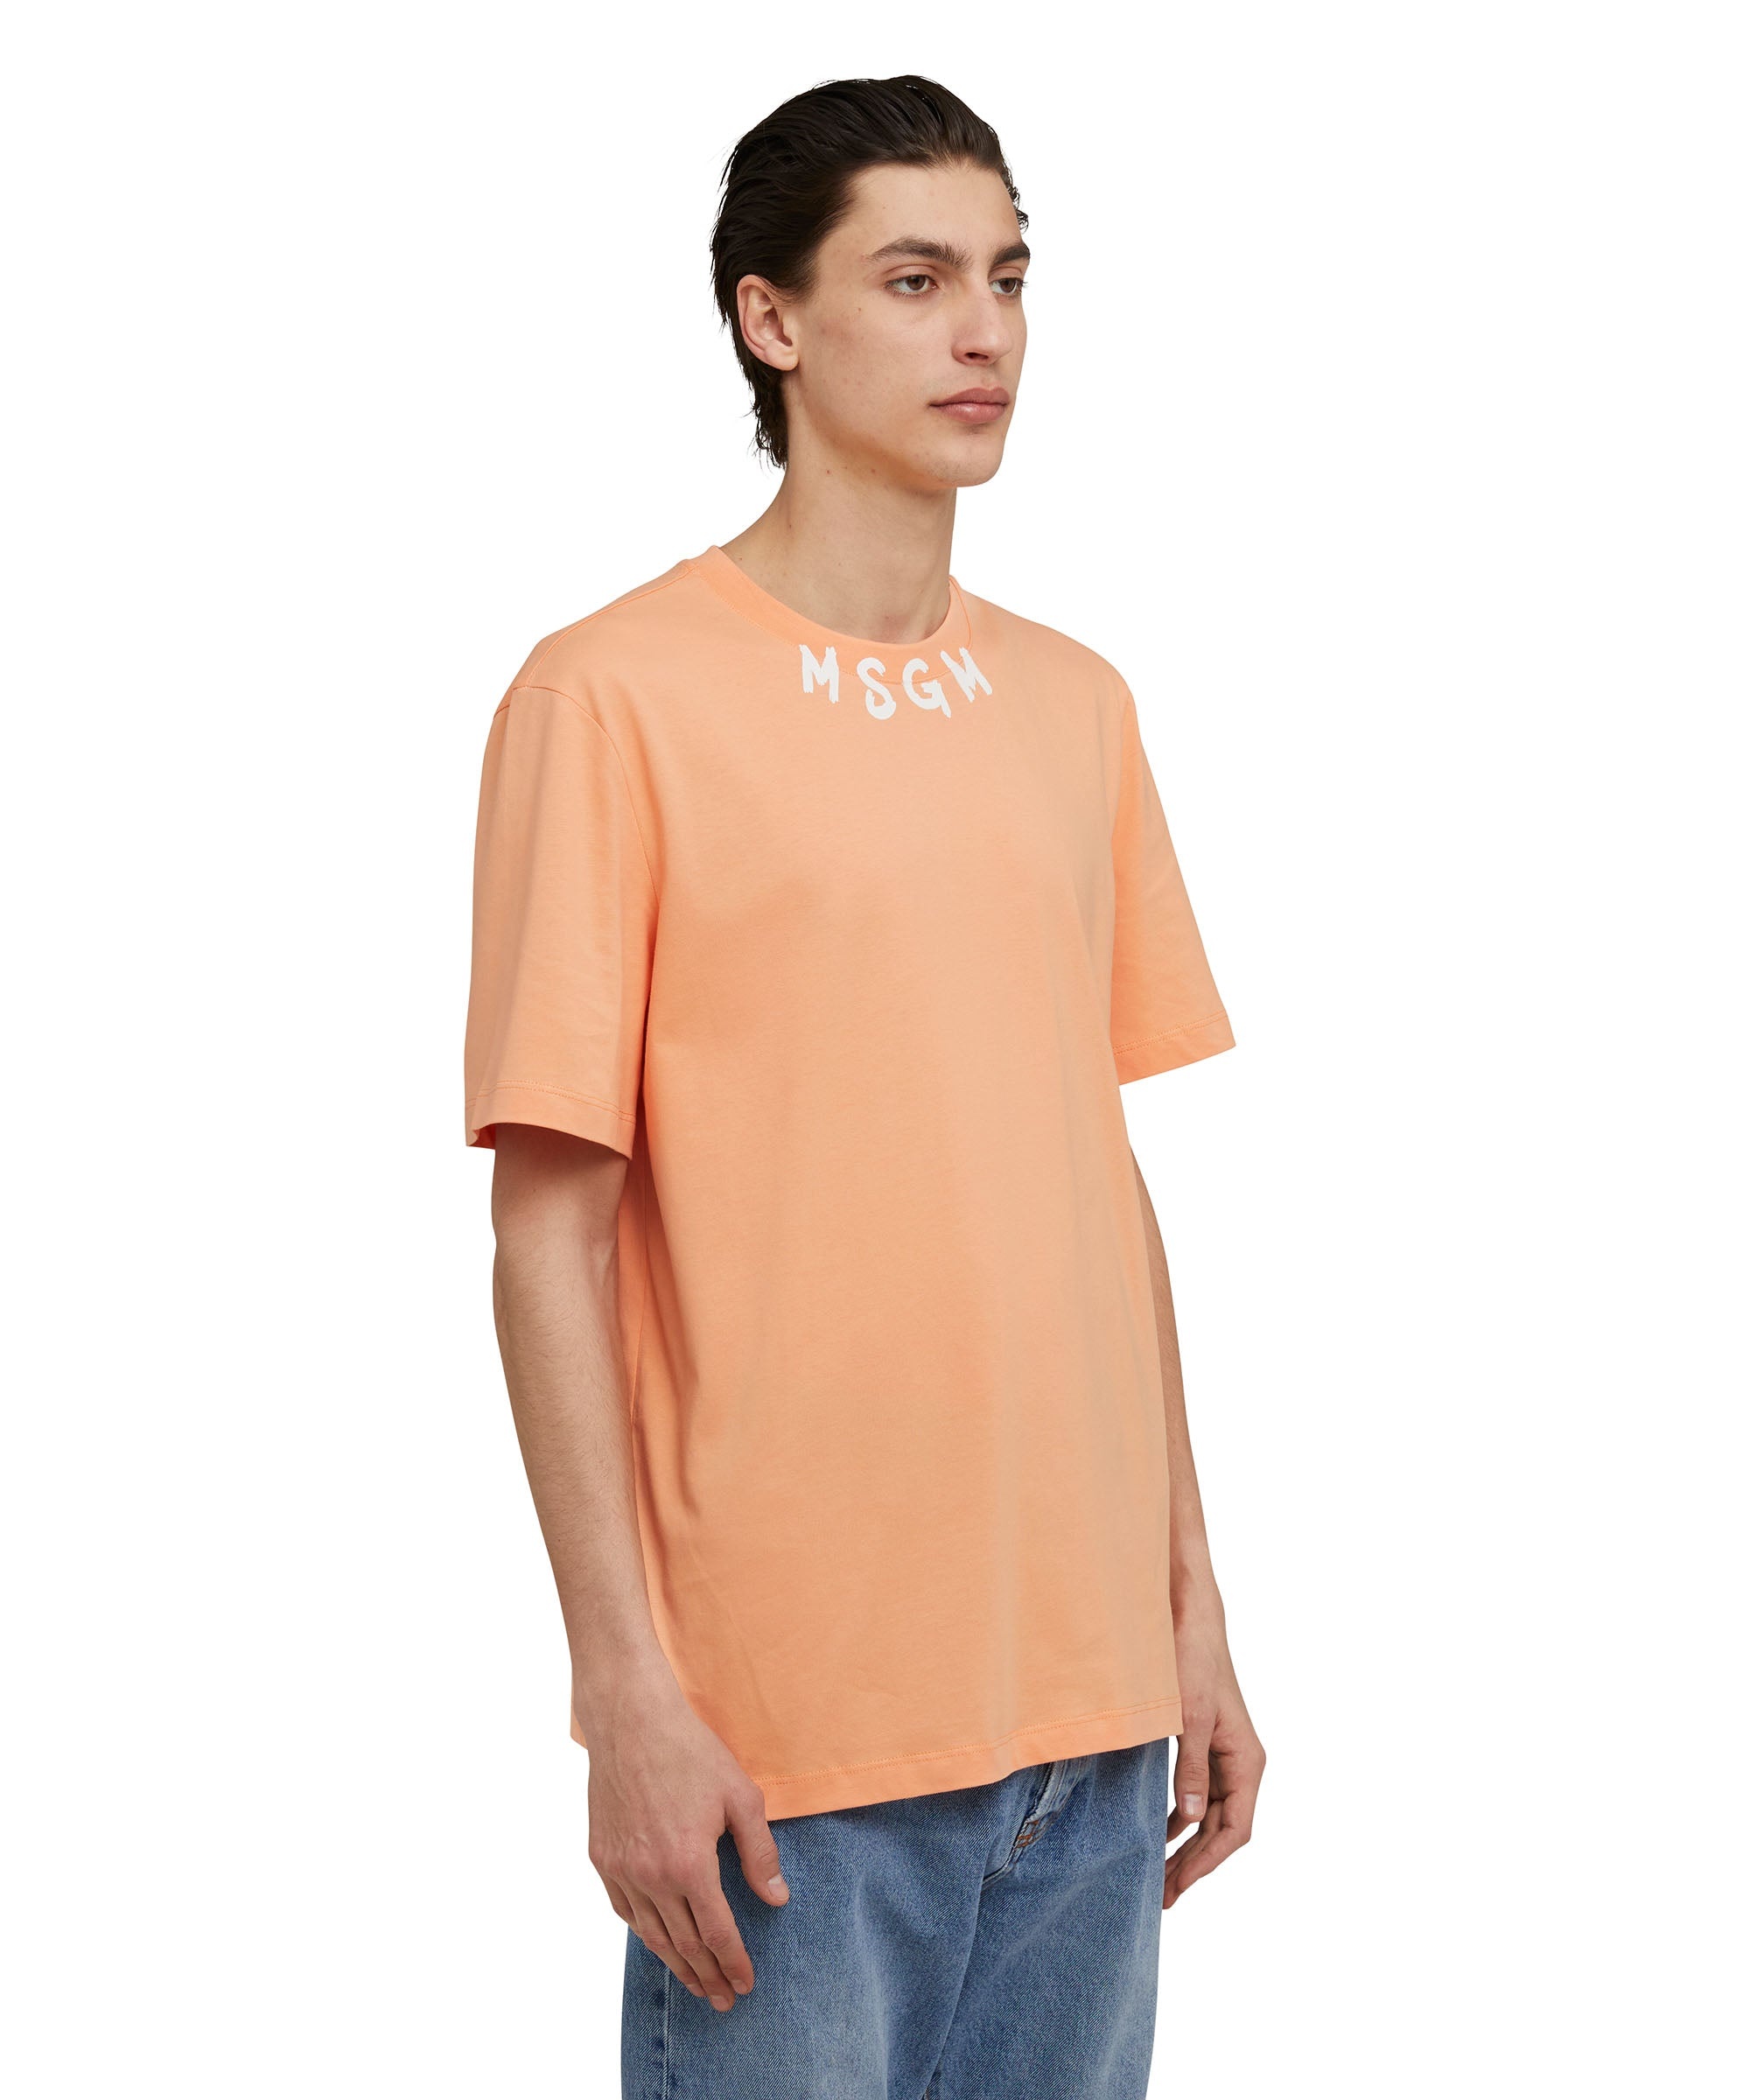 Cotton crewneck t-shirt with brushed MSGM logo at the neckline - 2